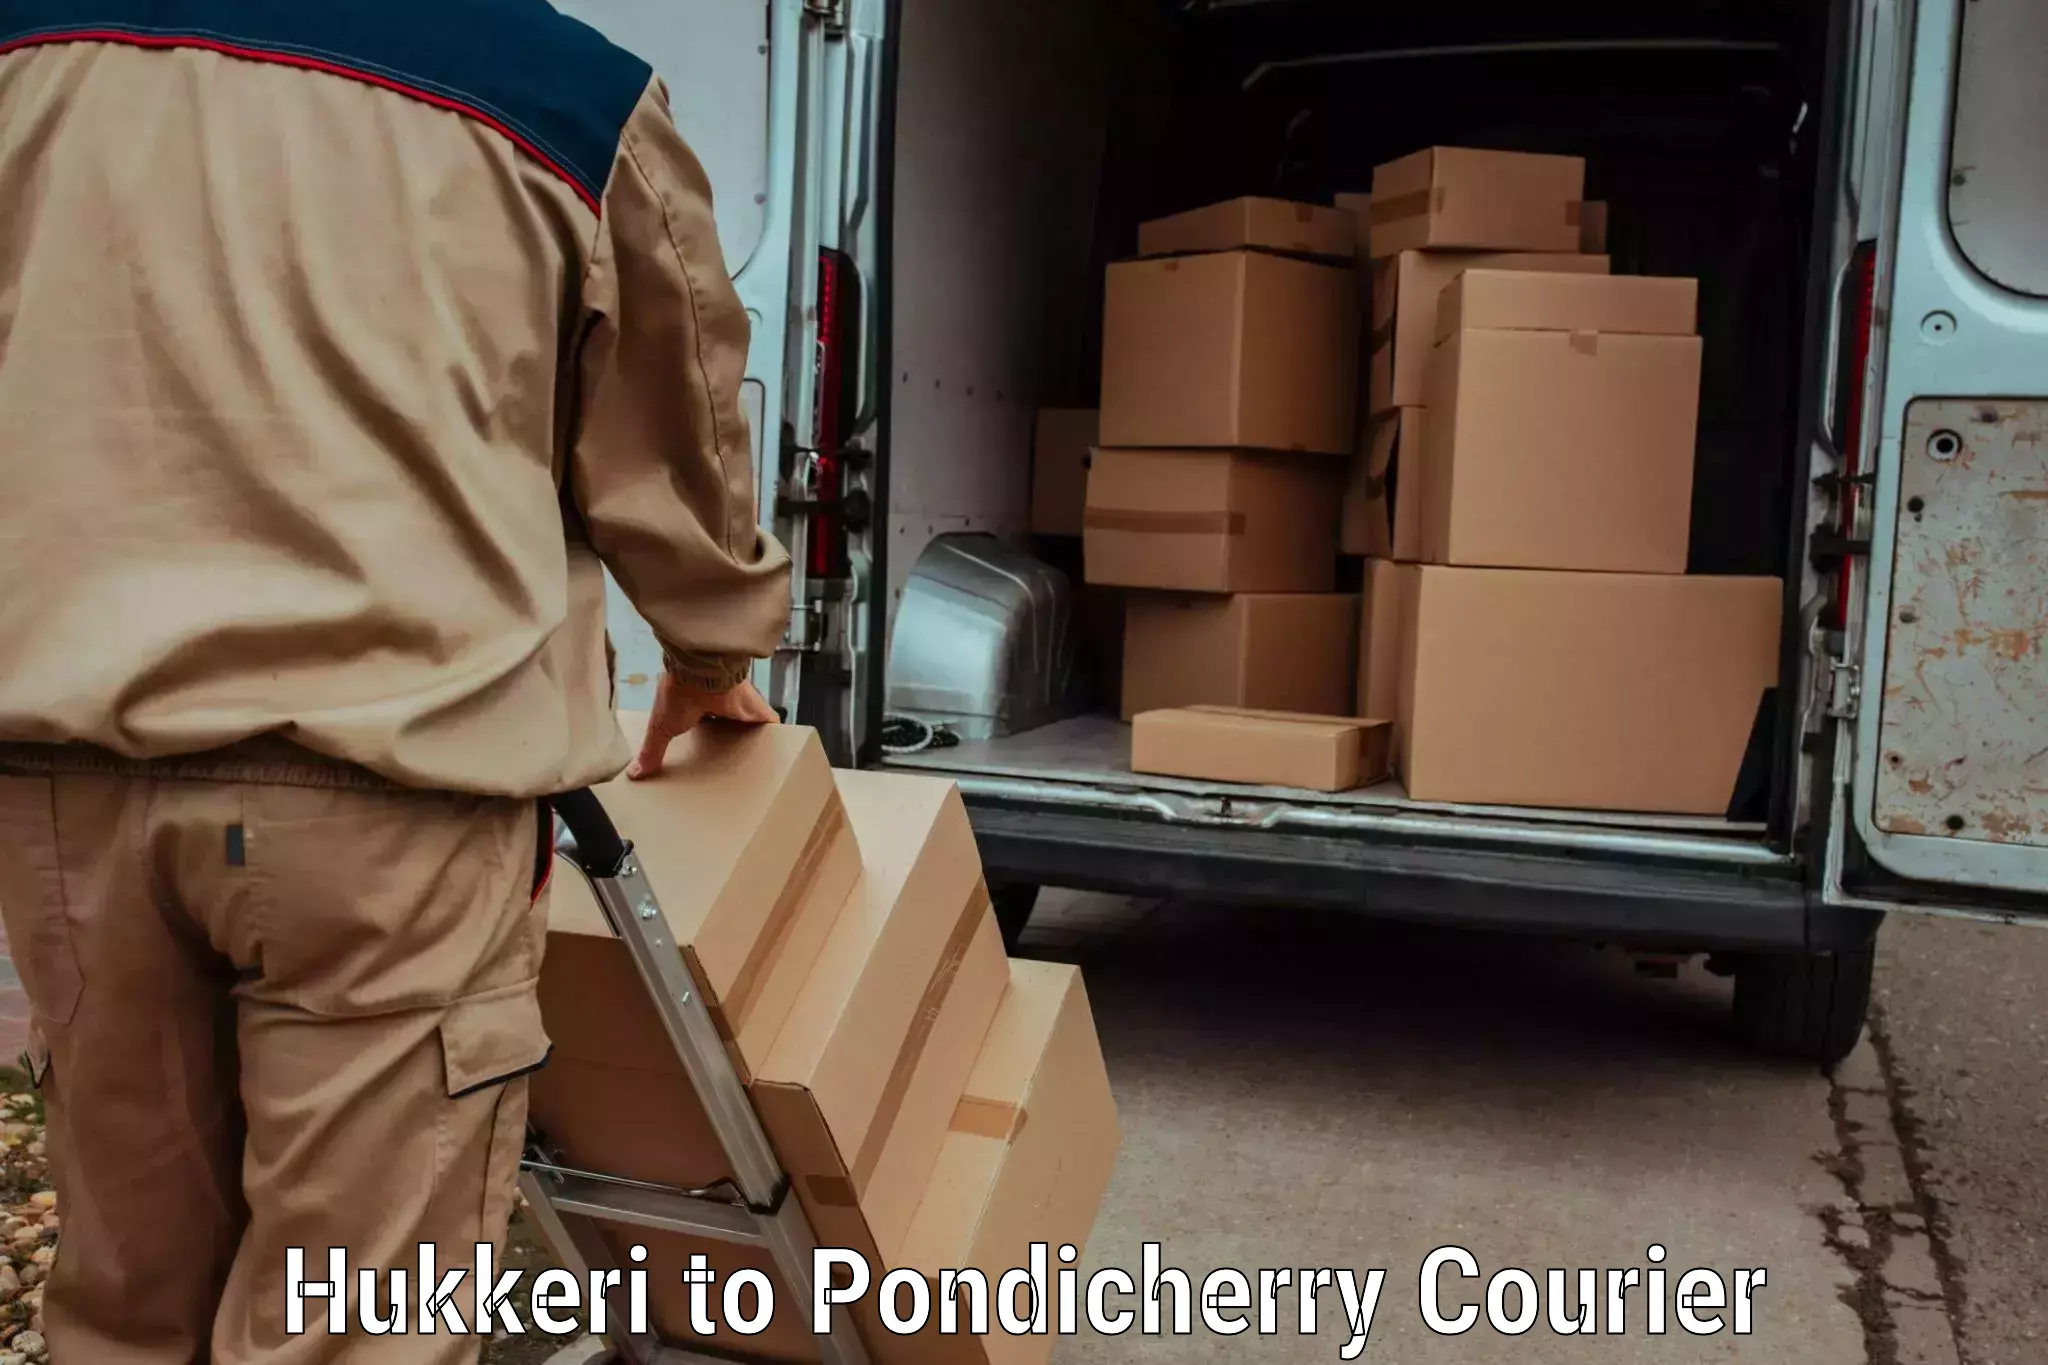 Express delivery capabilities Hukkeri to Pondicherry